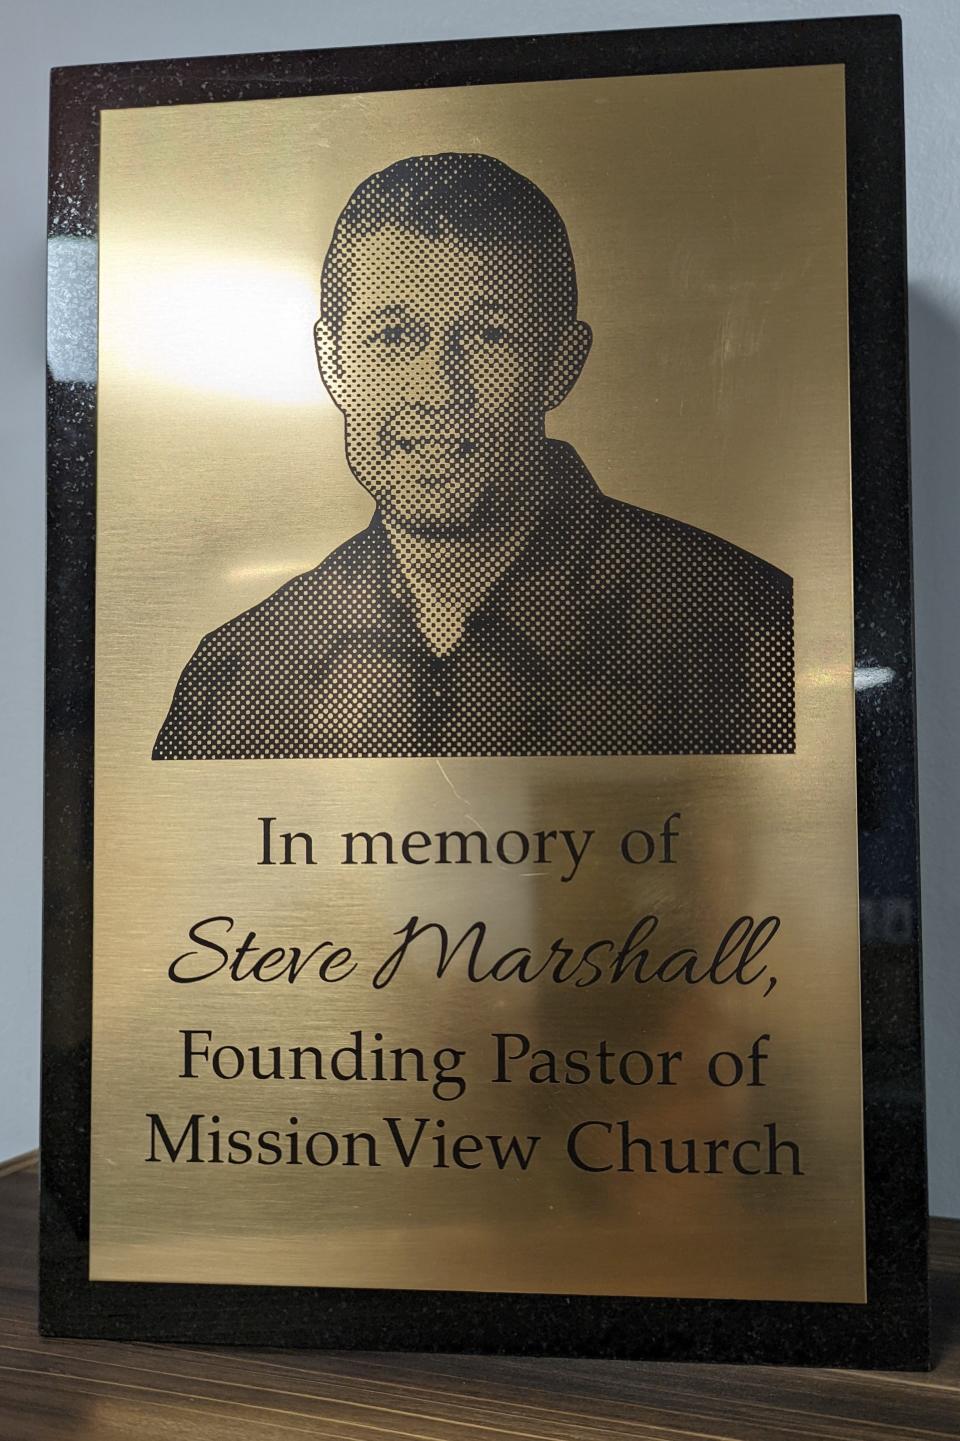 The late Rev. Steve Marshall is the founder of MissionView Church in North Canton. Marshall died in 2018.